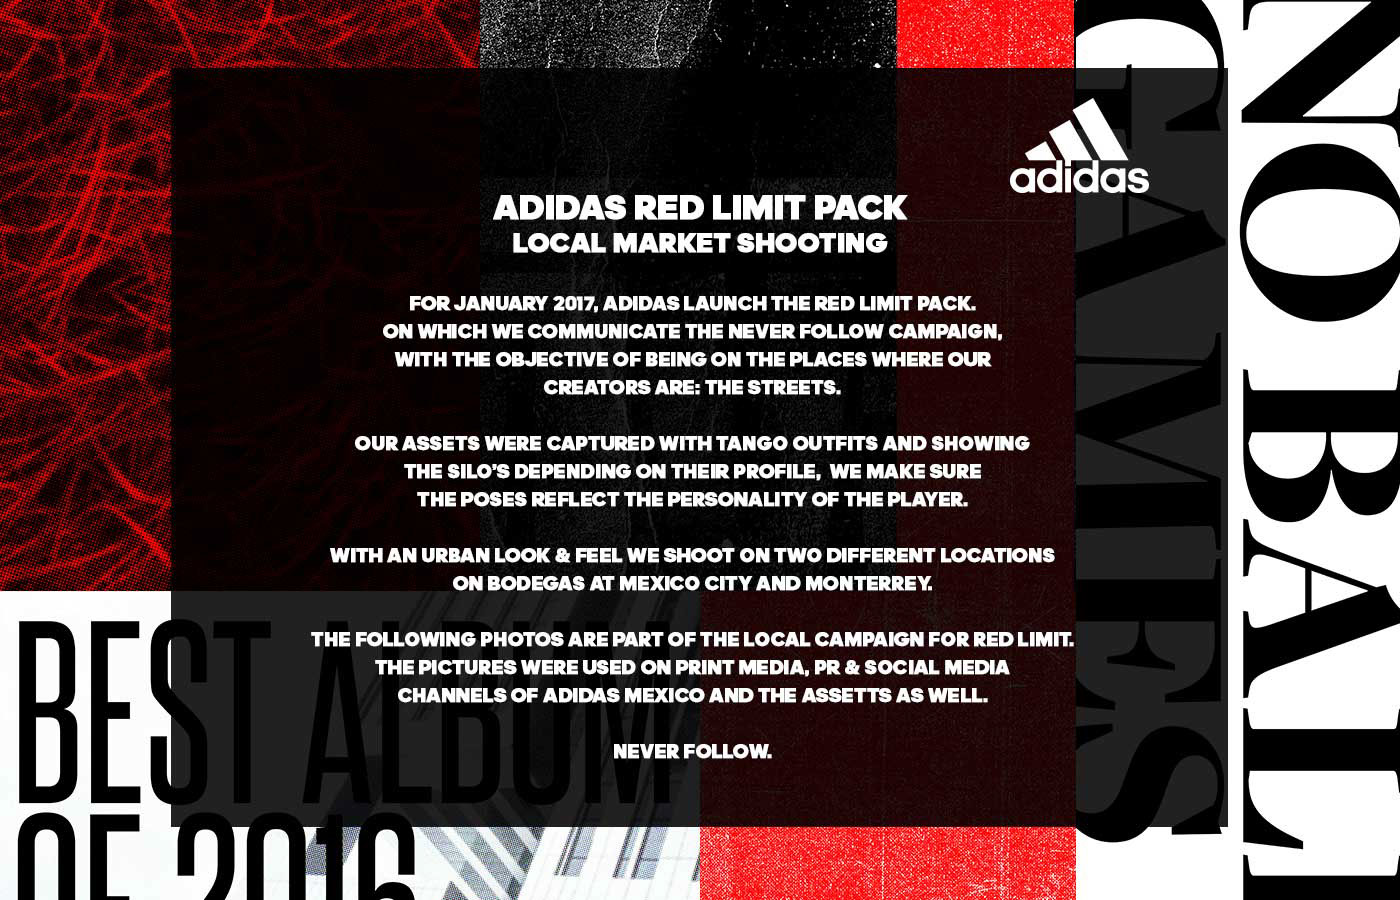 adidas soccer world cup Futbol tigres red RED LIMIT tango shooting